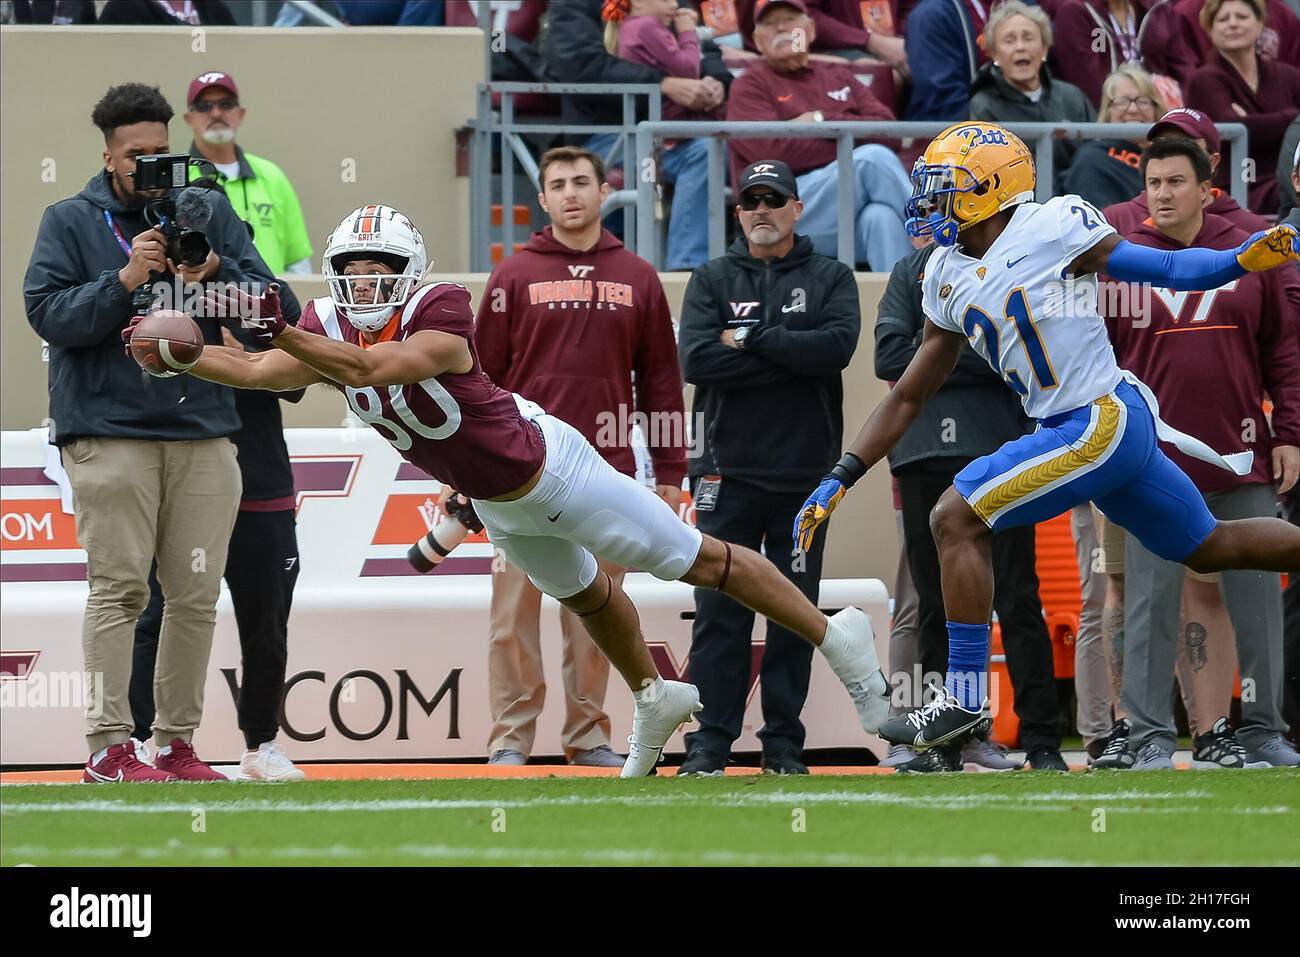 October 16, 2021: Virginia Tech Hokies wide receiver Kaleb Smith lays out to try to catch a pass during a NCAA football game between the Pittsburg Panthers and the Virginia Tech Hokies at Lane Stadium in Blacksburg, Virginia. Brian Bishop/(Photo by Brian Bishop/CSM/Sipa USA) Stock Photo